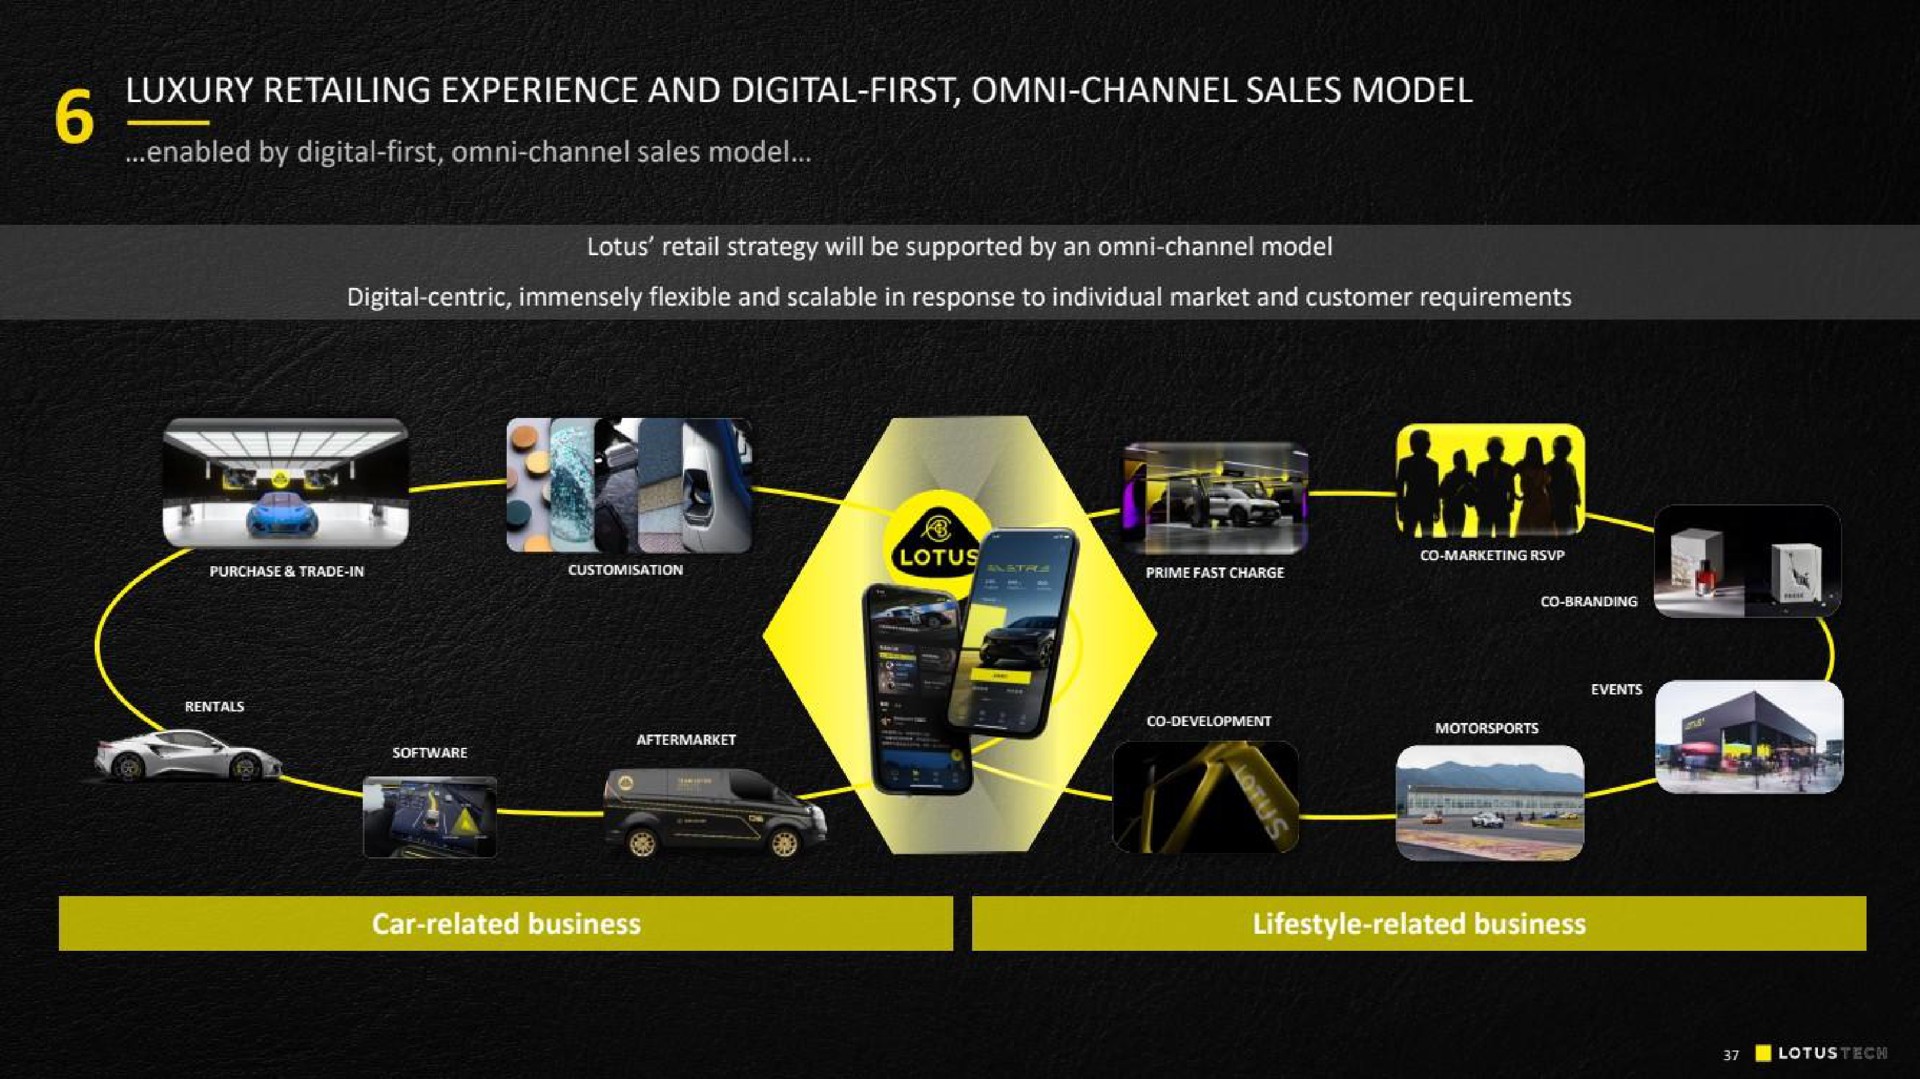 luxury retailing experience and digital first channel sales model | Lotus Cars